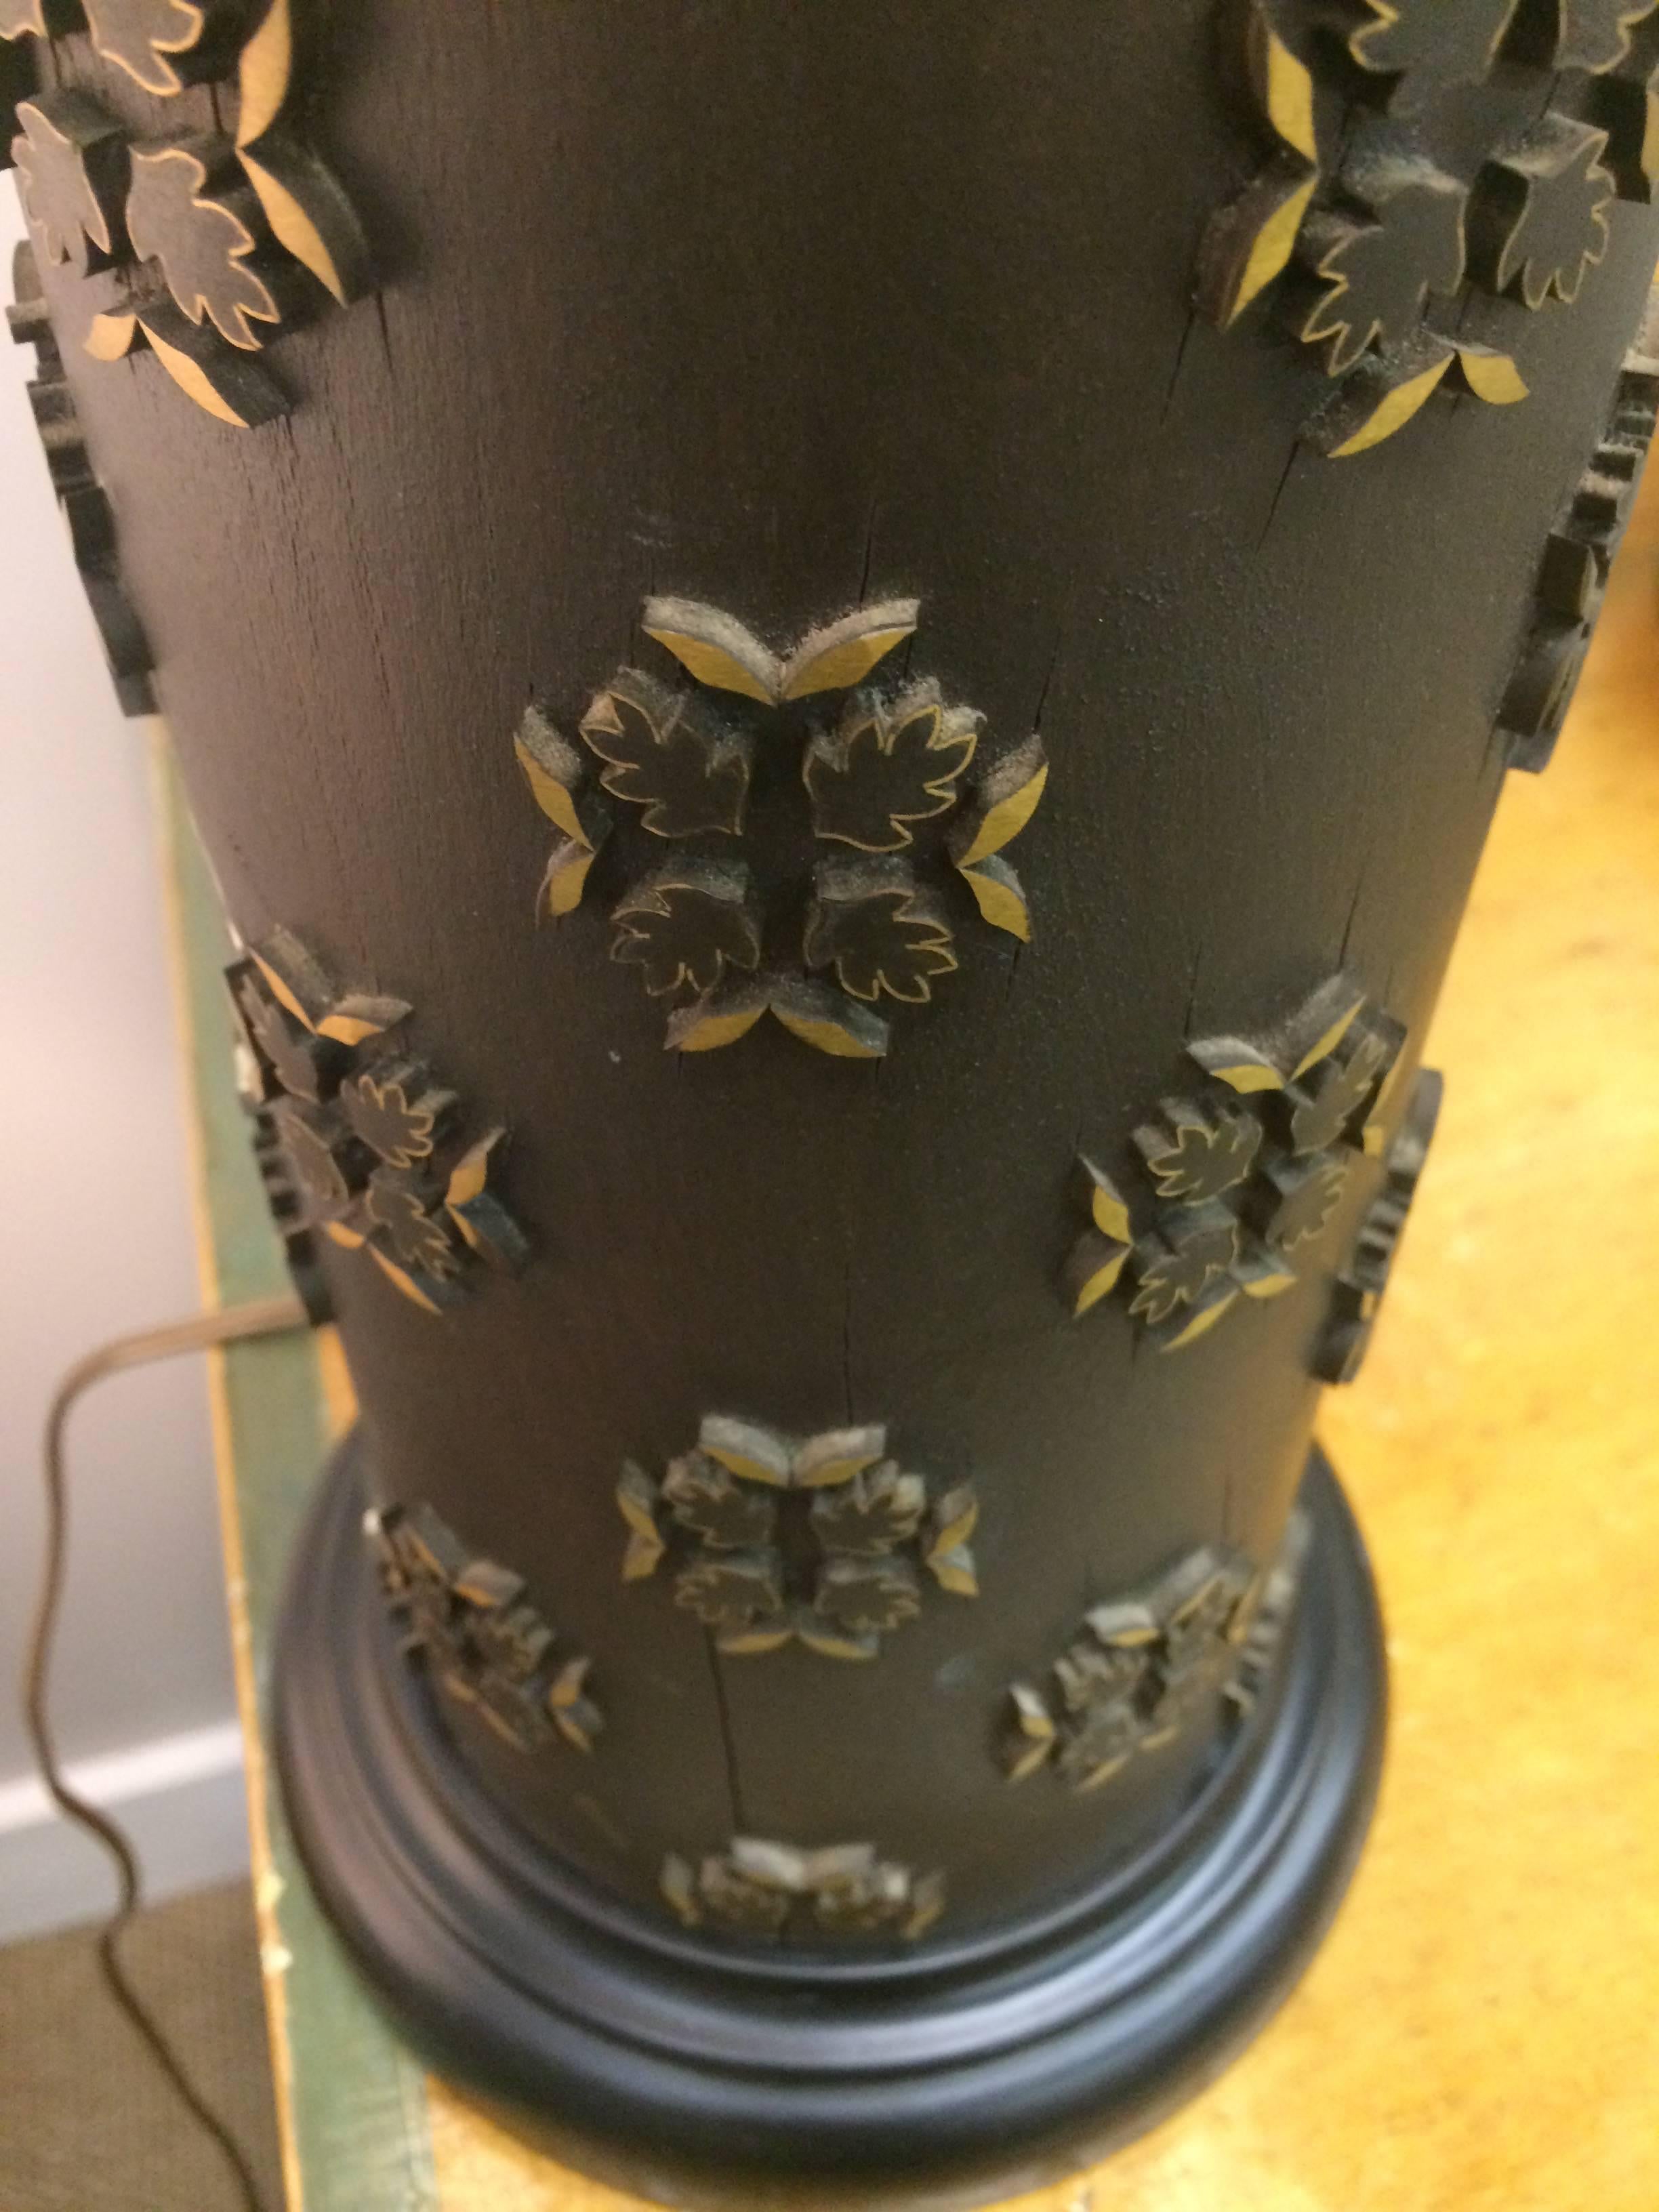 Stunning lamp having a column shaped base made from a wallpaper roller having a dark brown background and decorative raised flowers in a bronze color. Custom shade: W 15” x 11 ¼.